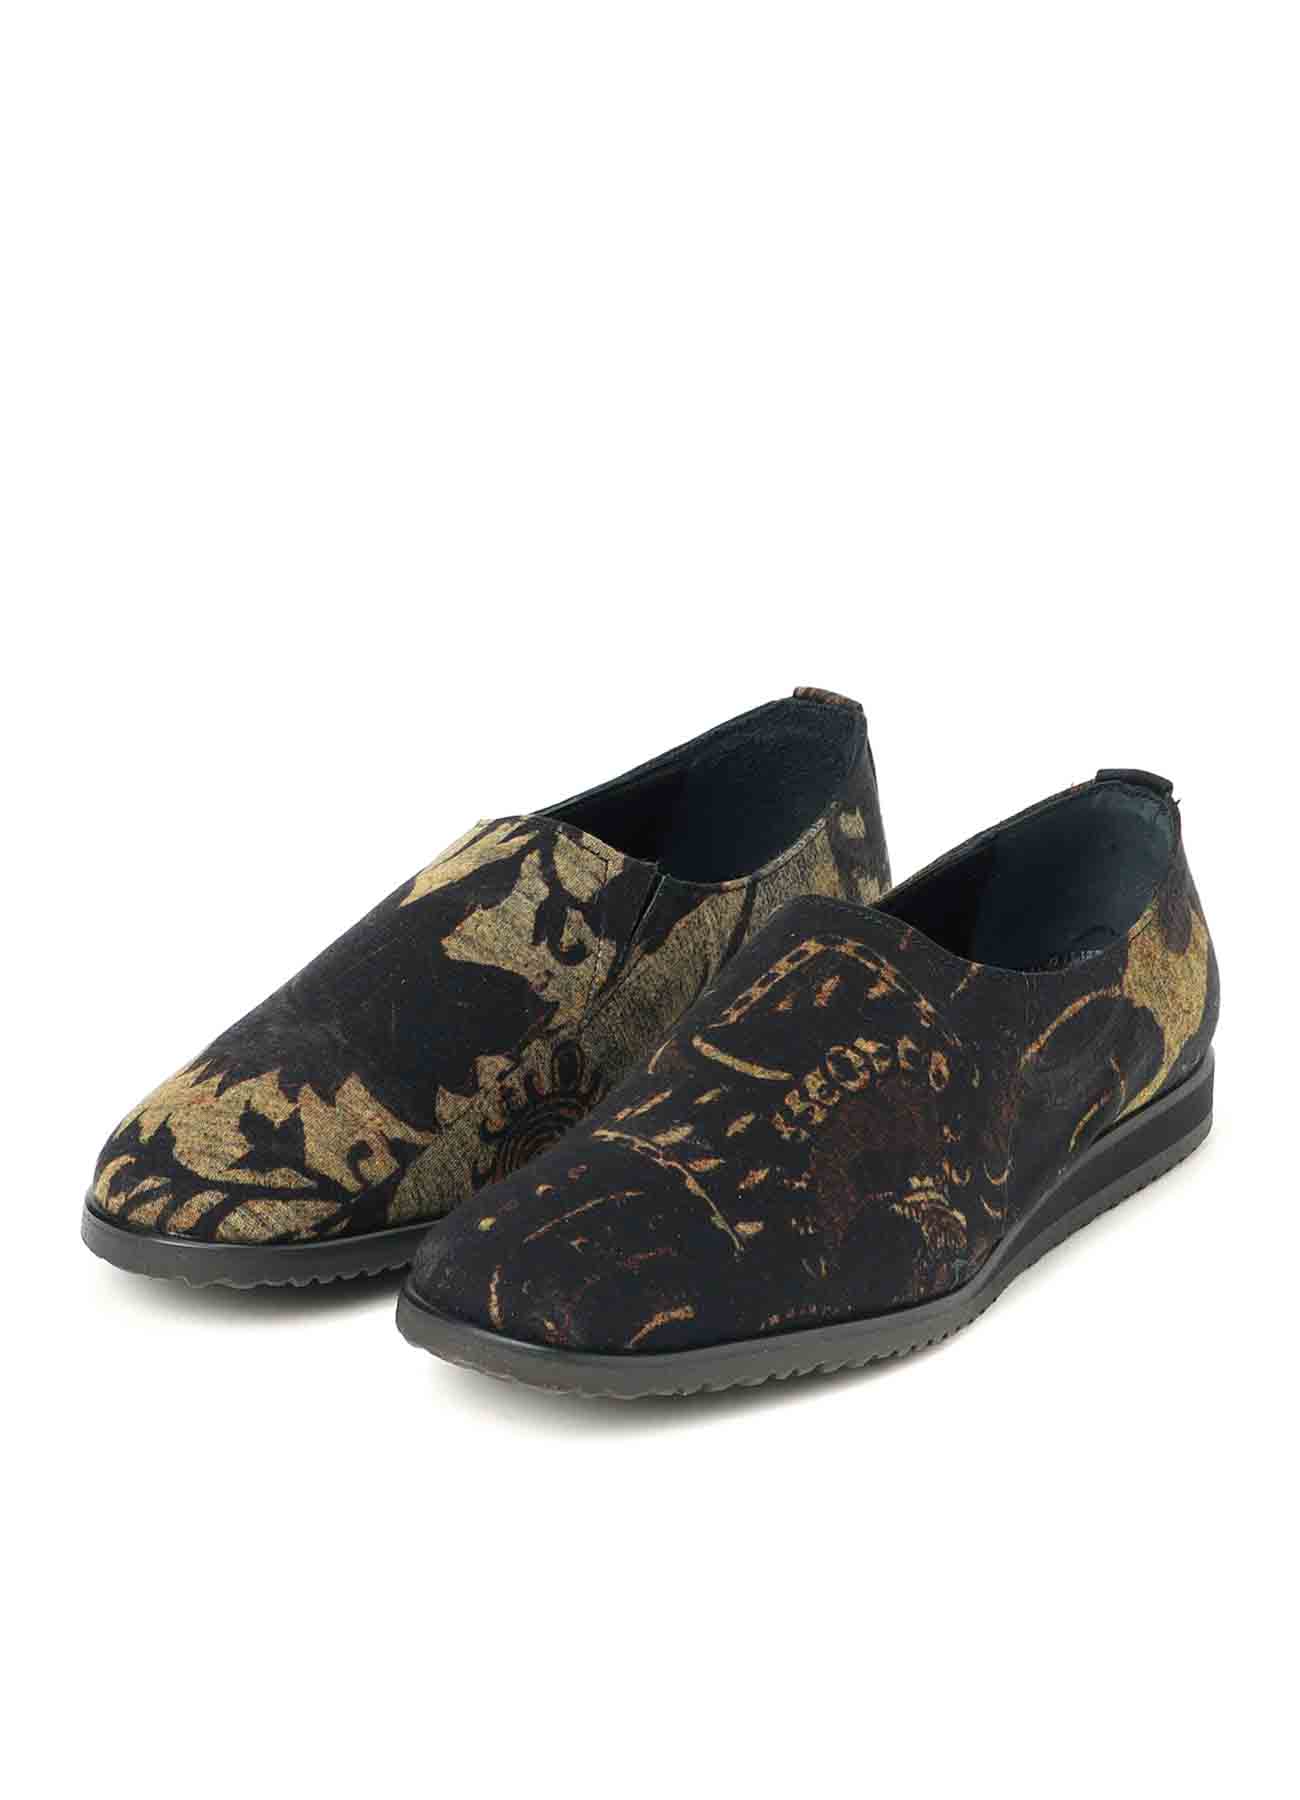 【Launching 10:00(JST), March 29th】PRINTED SLIP-ON SHOES C